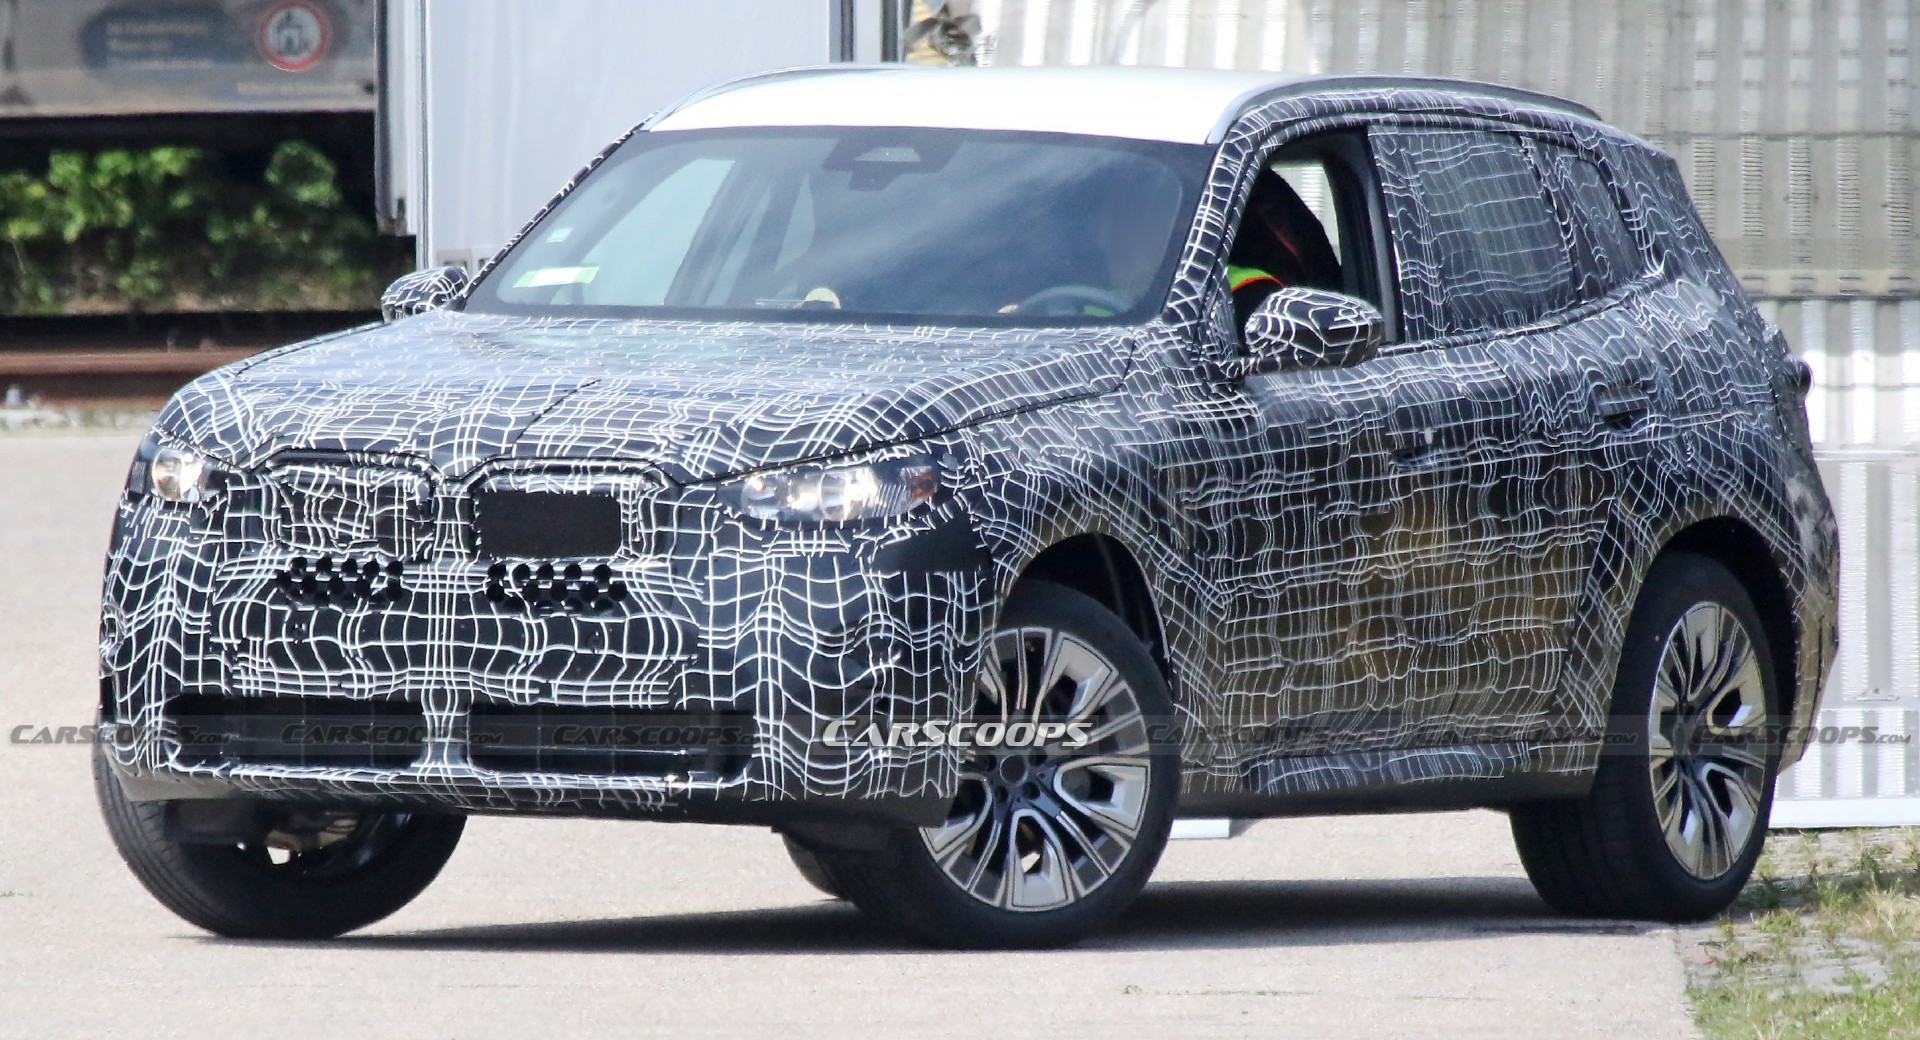 New 2021 BMW X4 facelift arrives with new look inside and out